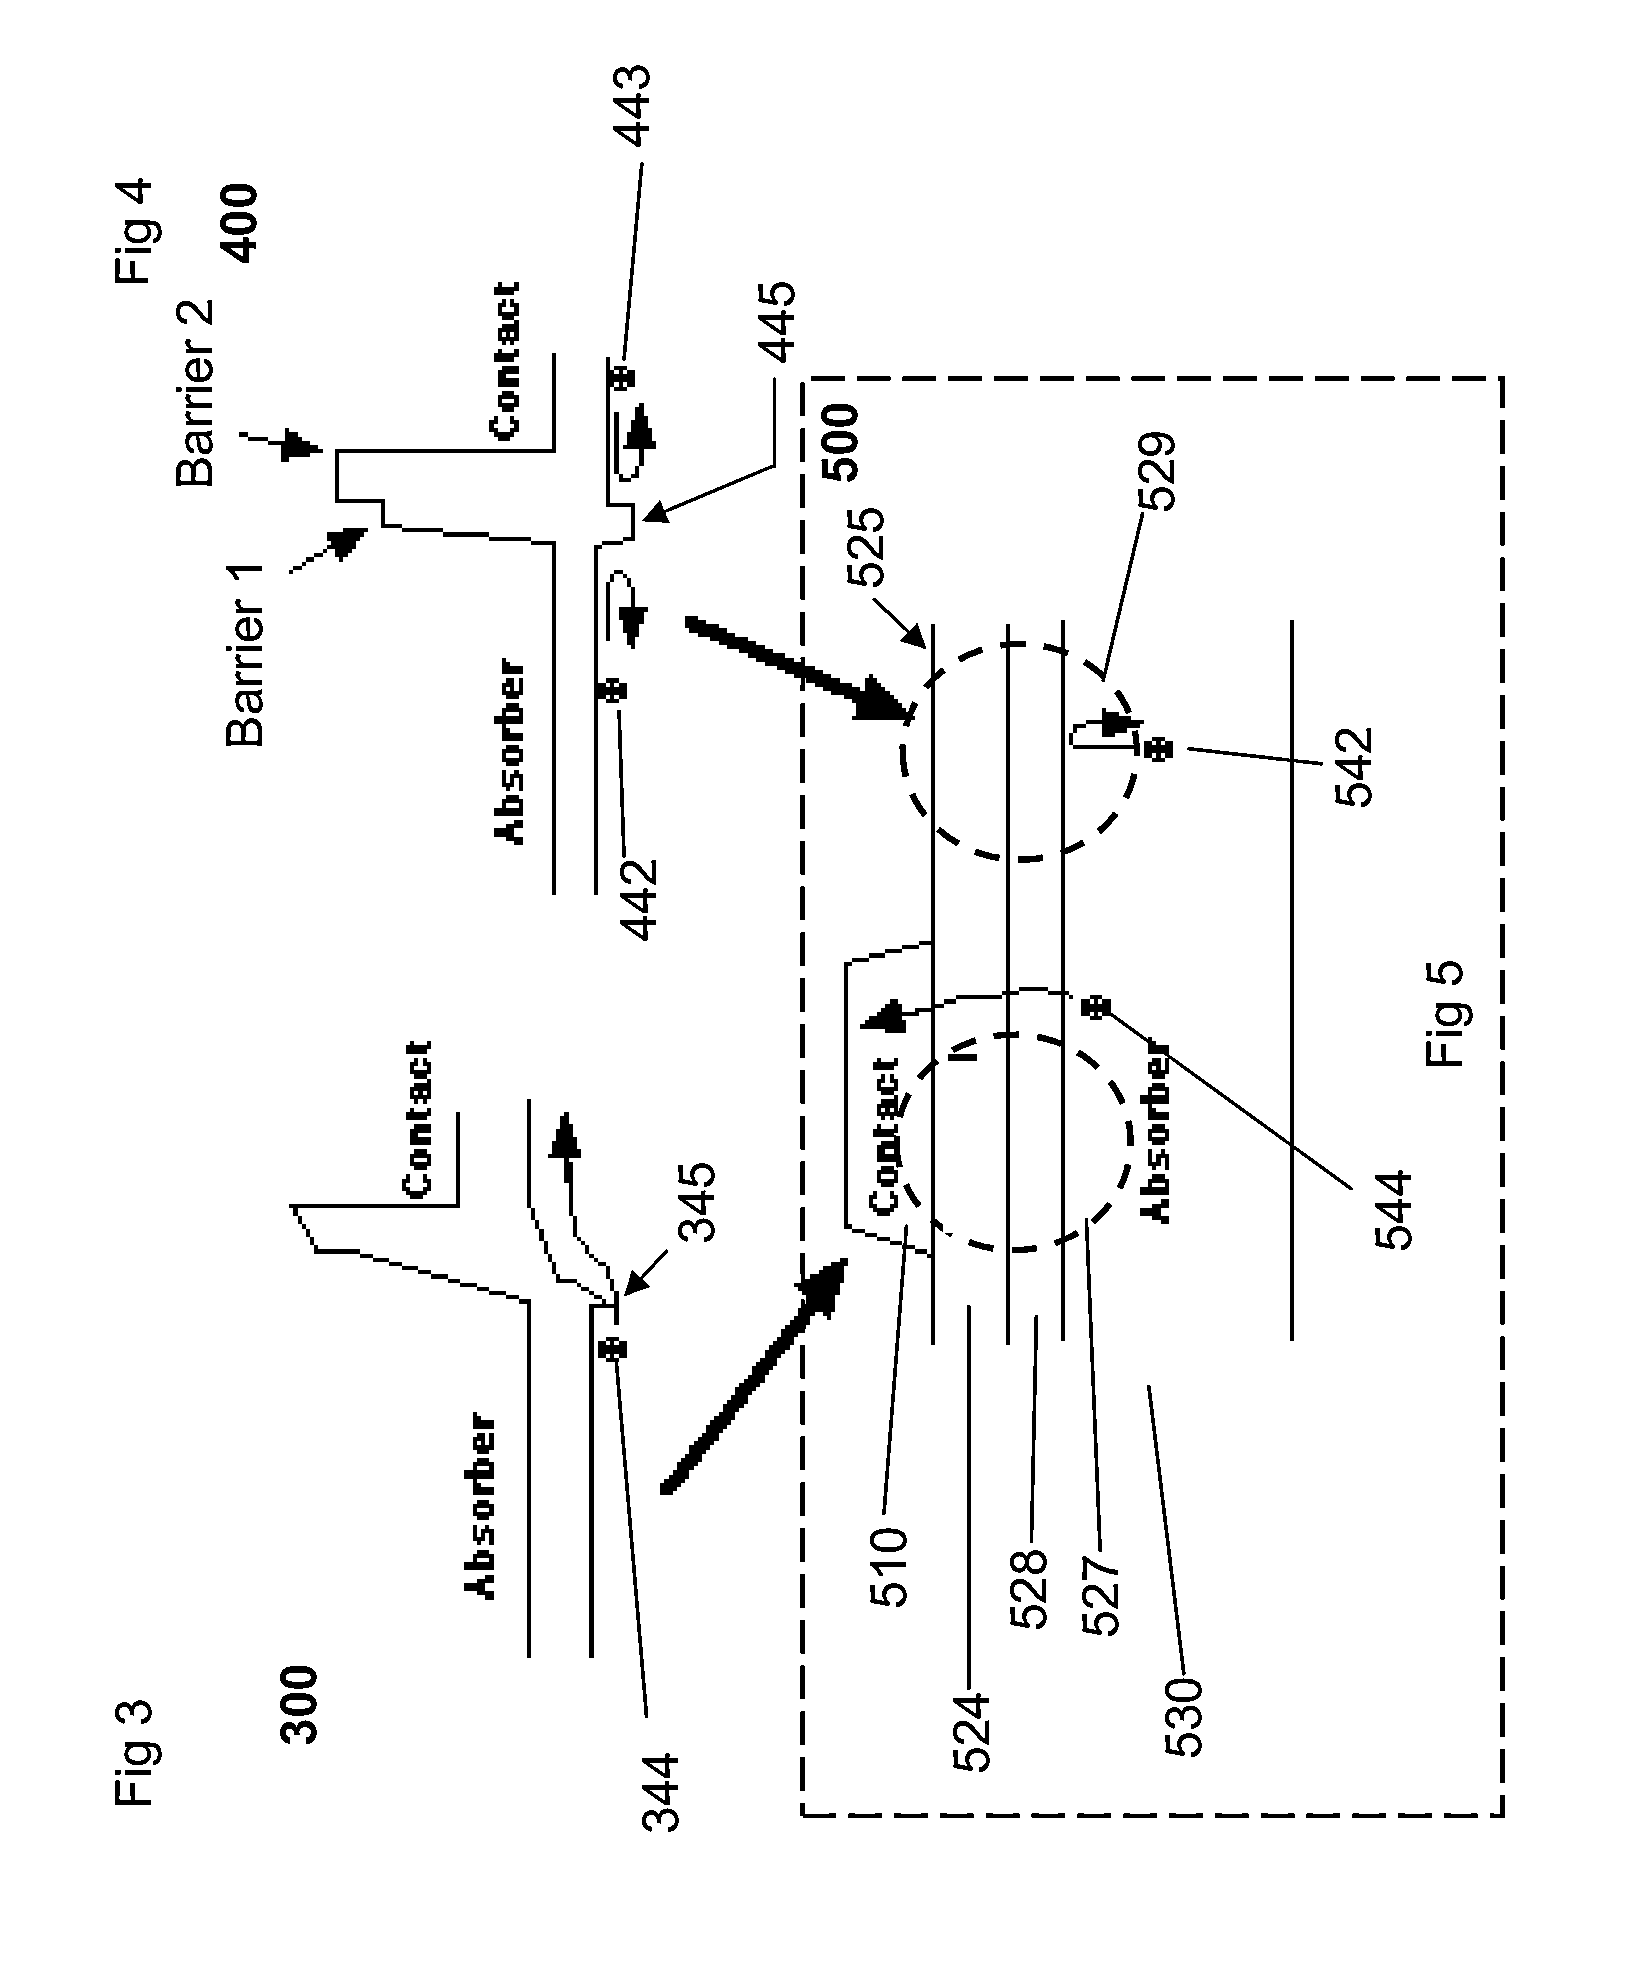 Compound-barrier infrared photodetector